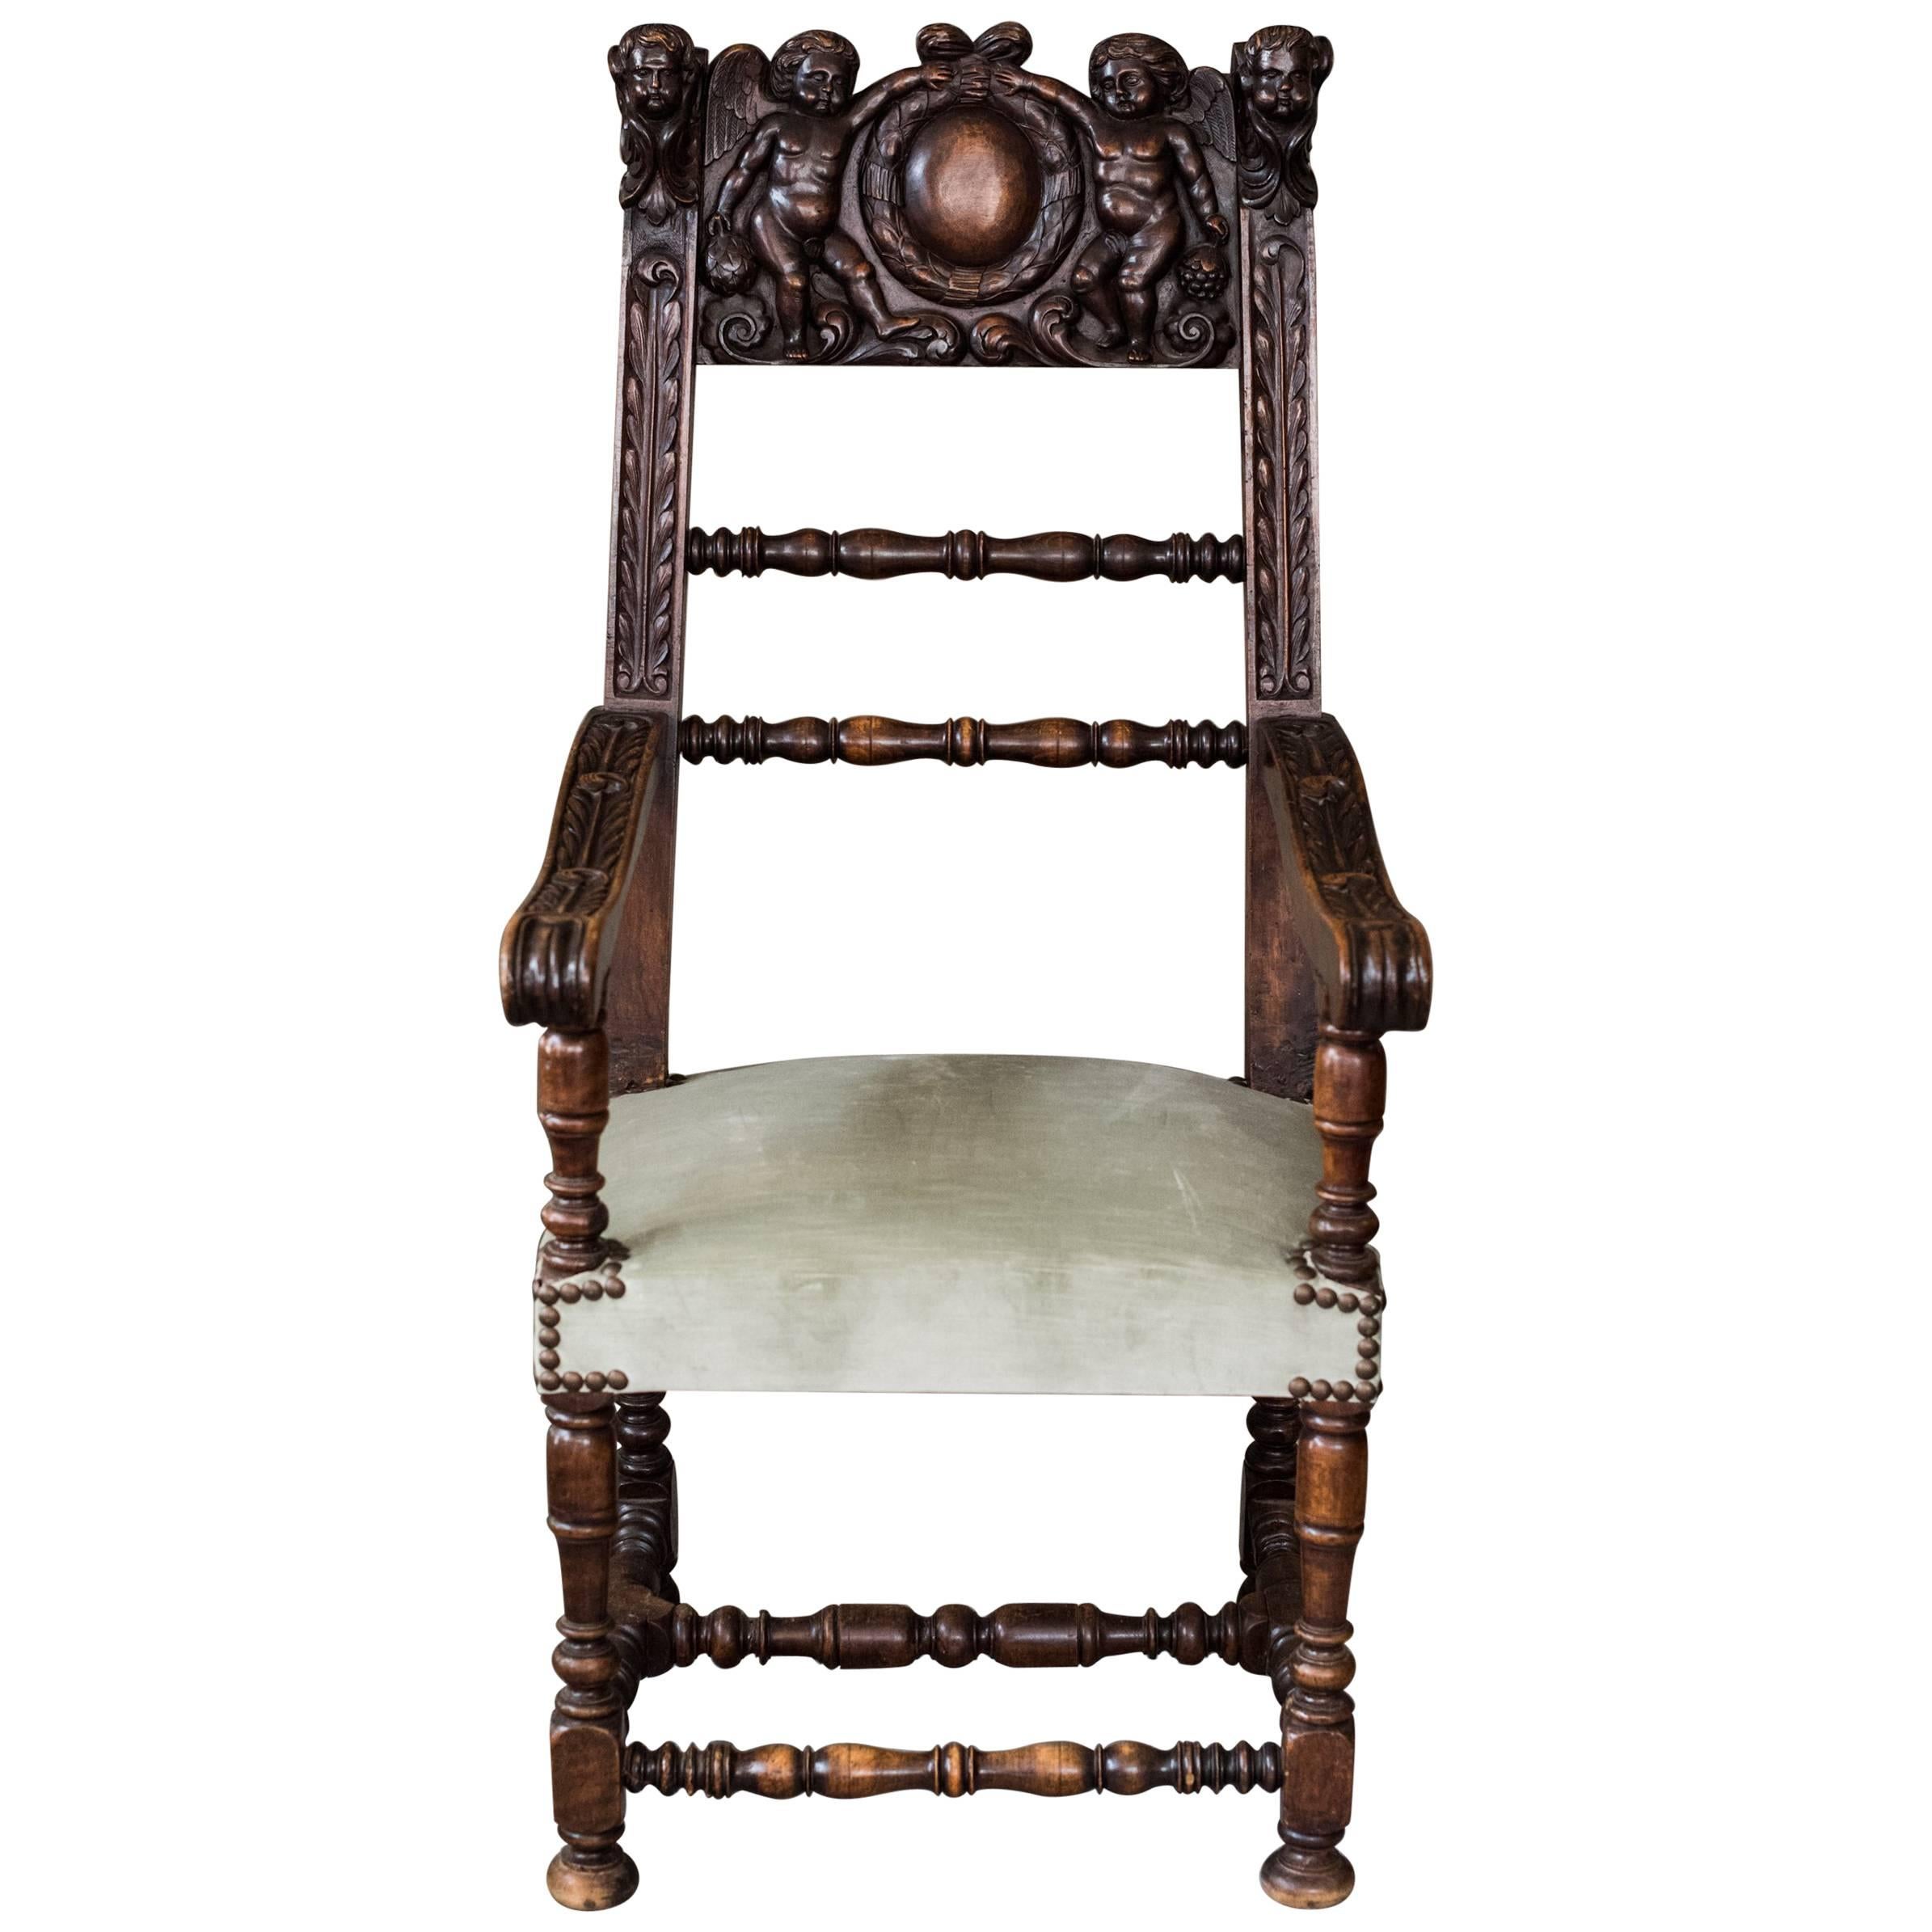 19th Century Jacobean / Renaissance Revival Carved Throne For Sale